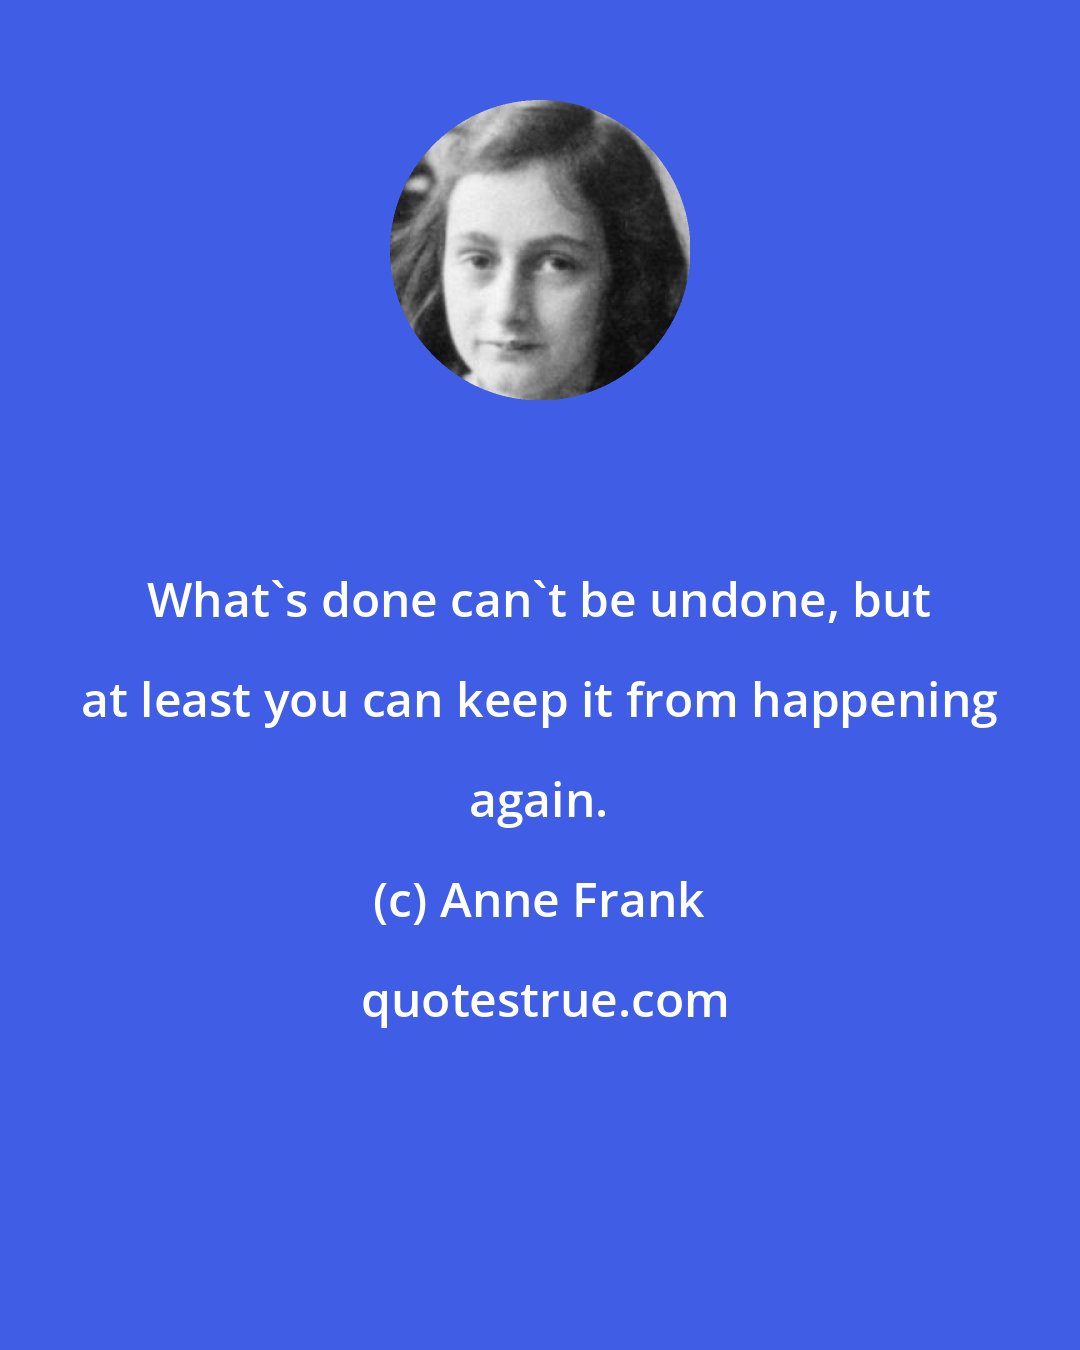 Anne Frank: What's done can't be undone, but at least you can keep it from happening again.